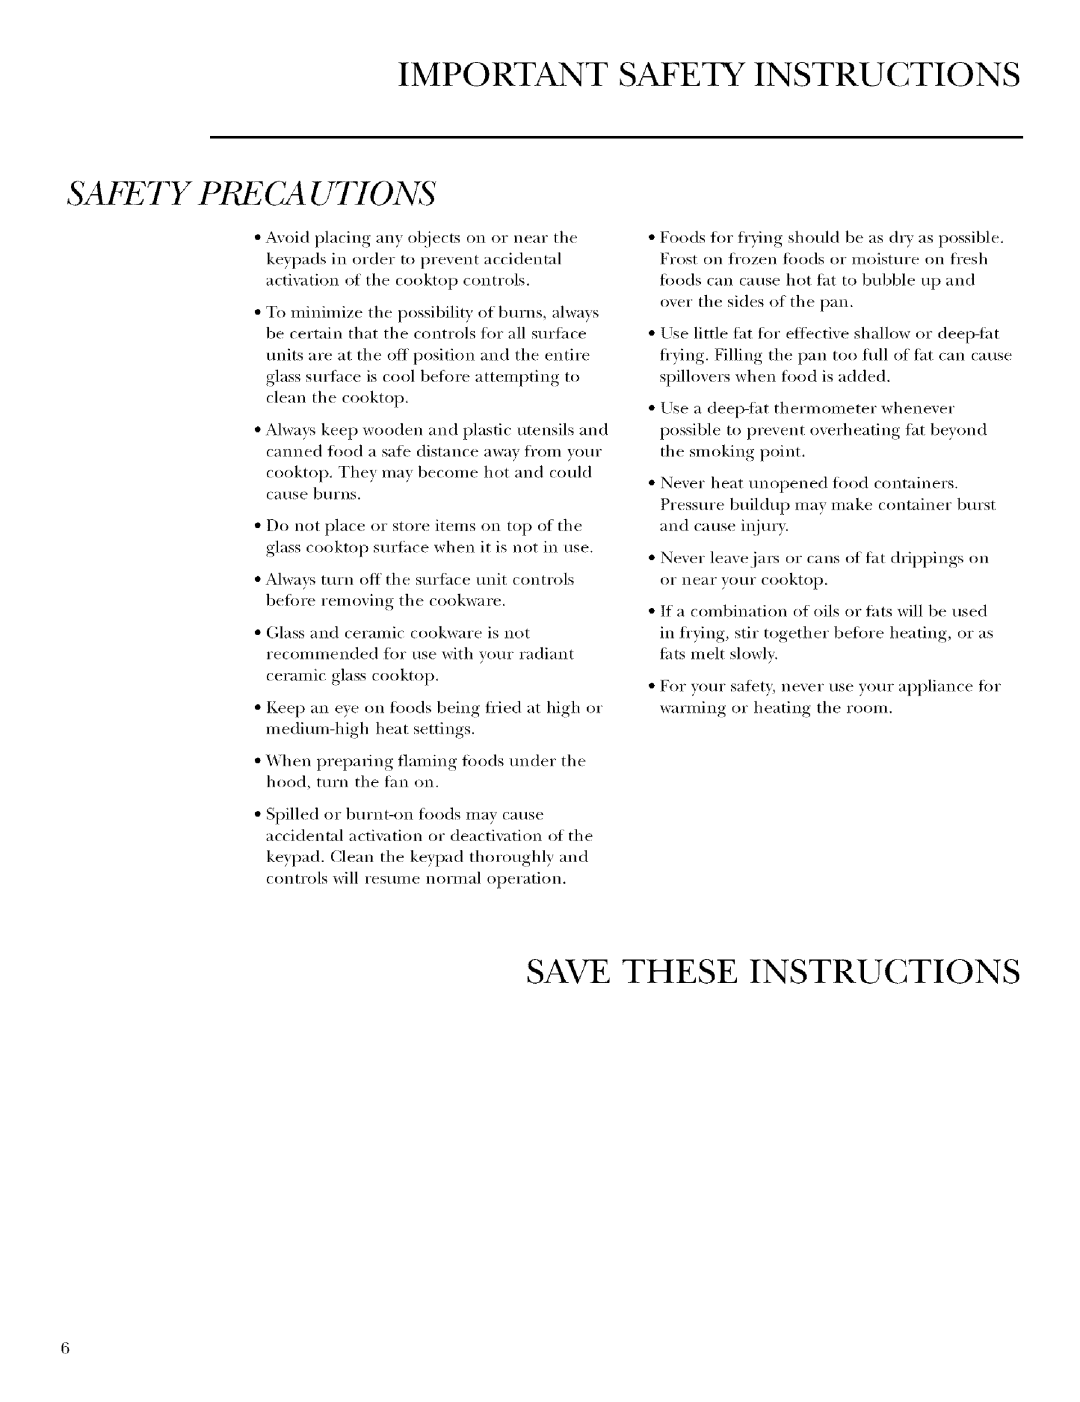 GE Monogram ZEU36R, ZEU30R manual Save These Instructions, Safety Preca Utions, Important Safety Instructions 